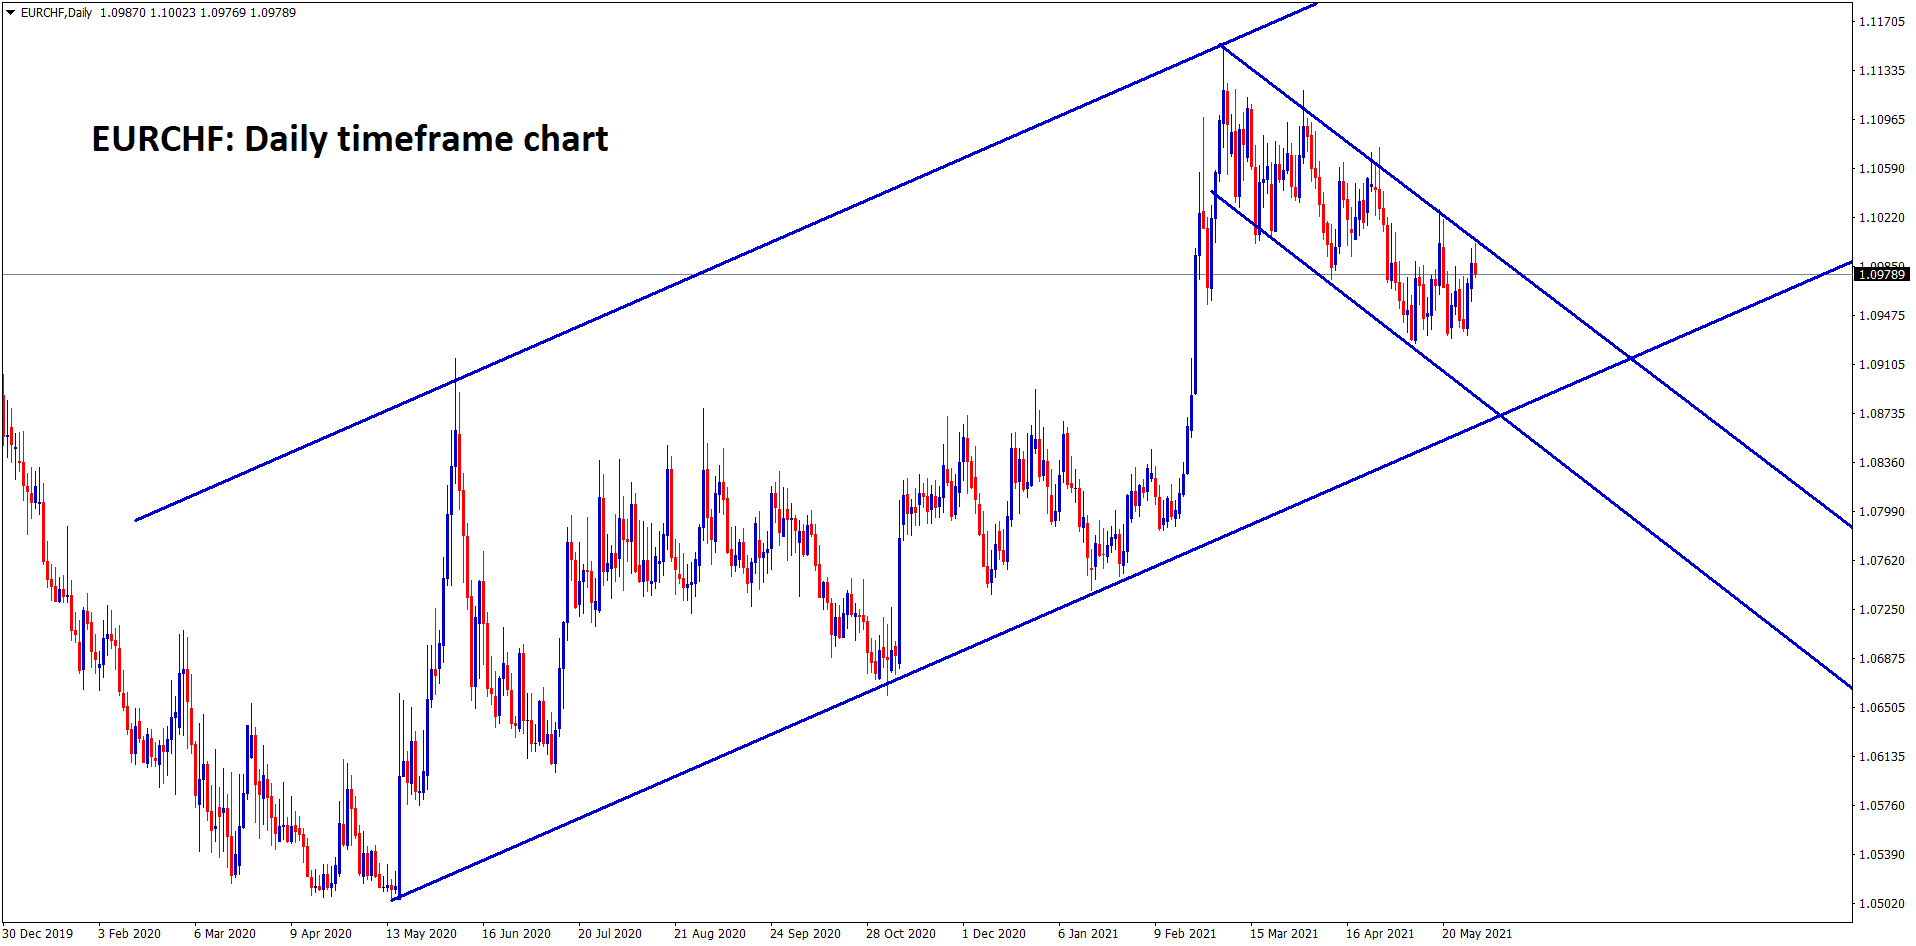 EURCHF is moving in a Uptrend for long term view but in short term its moving in downtrend